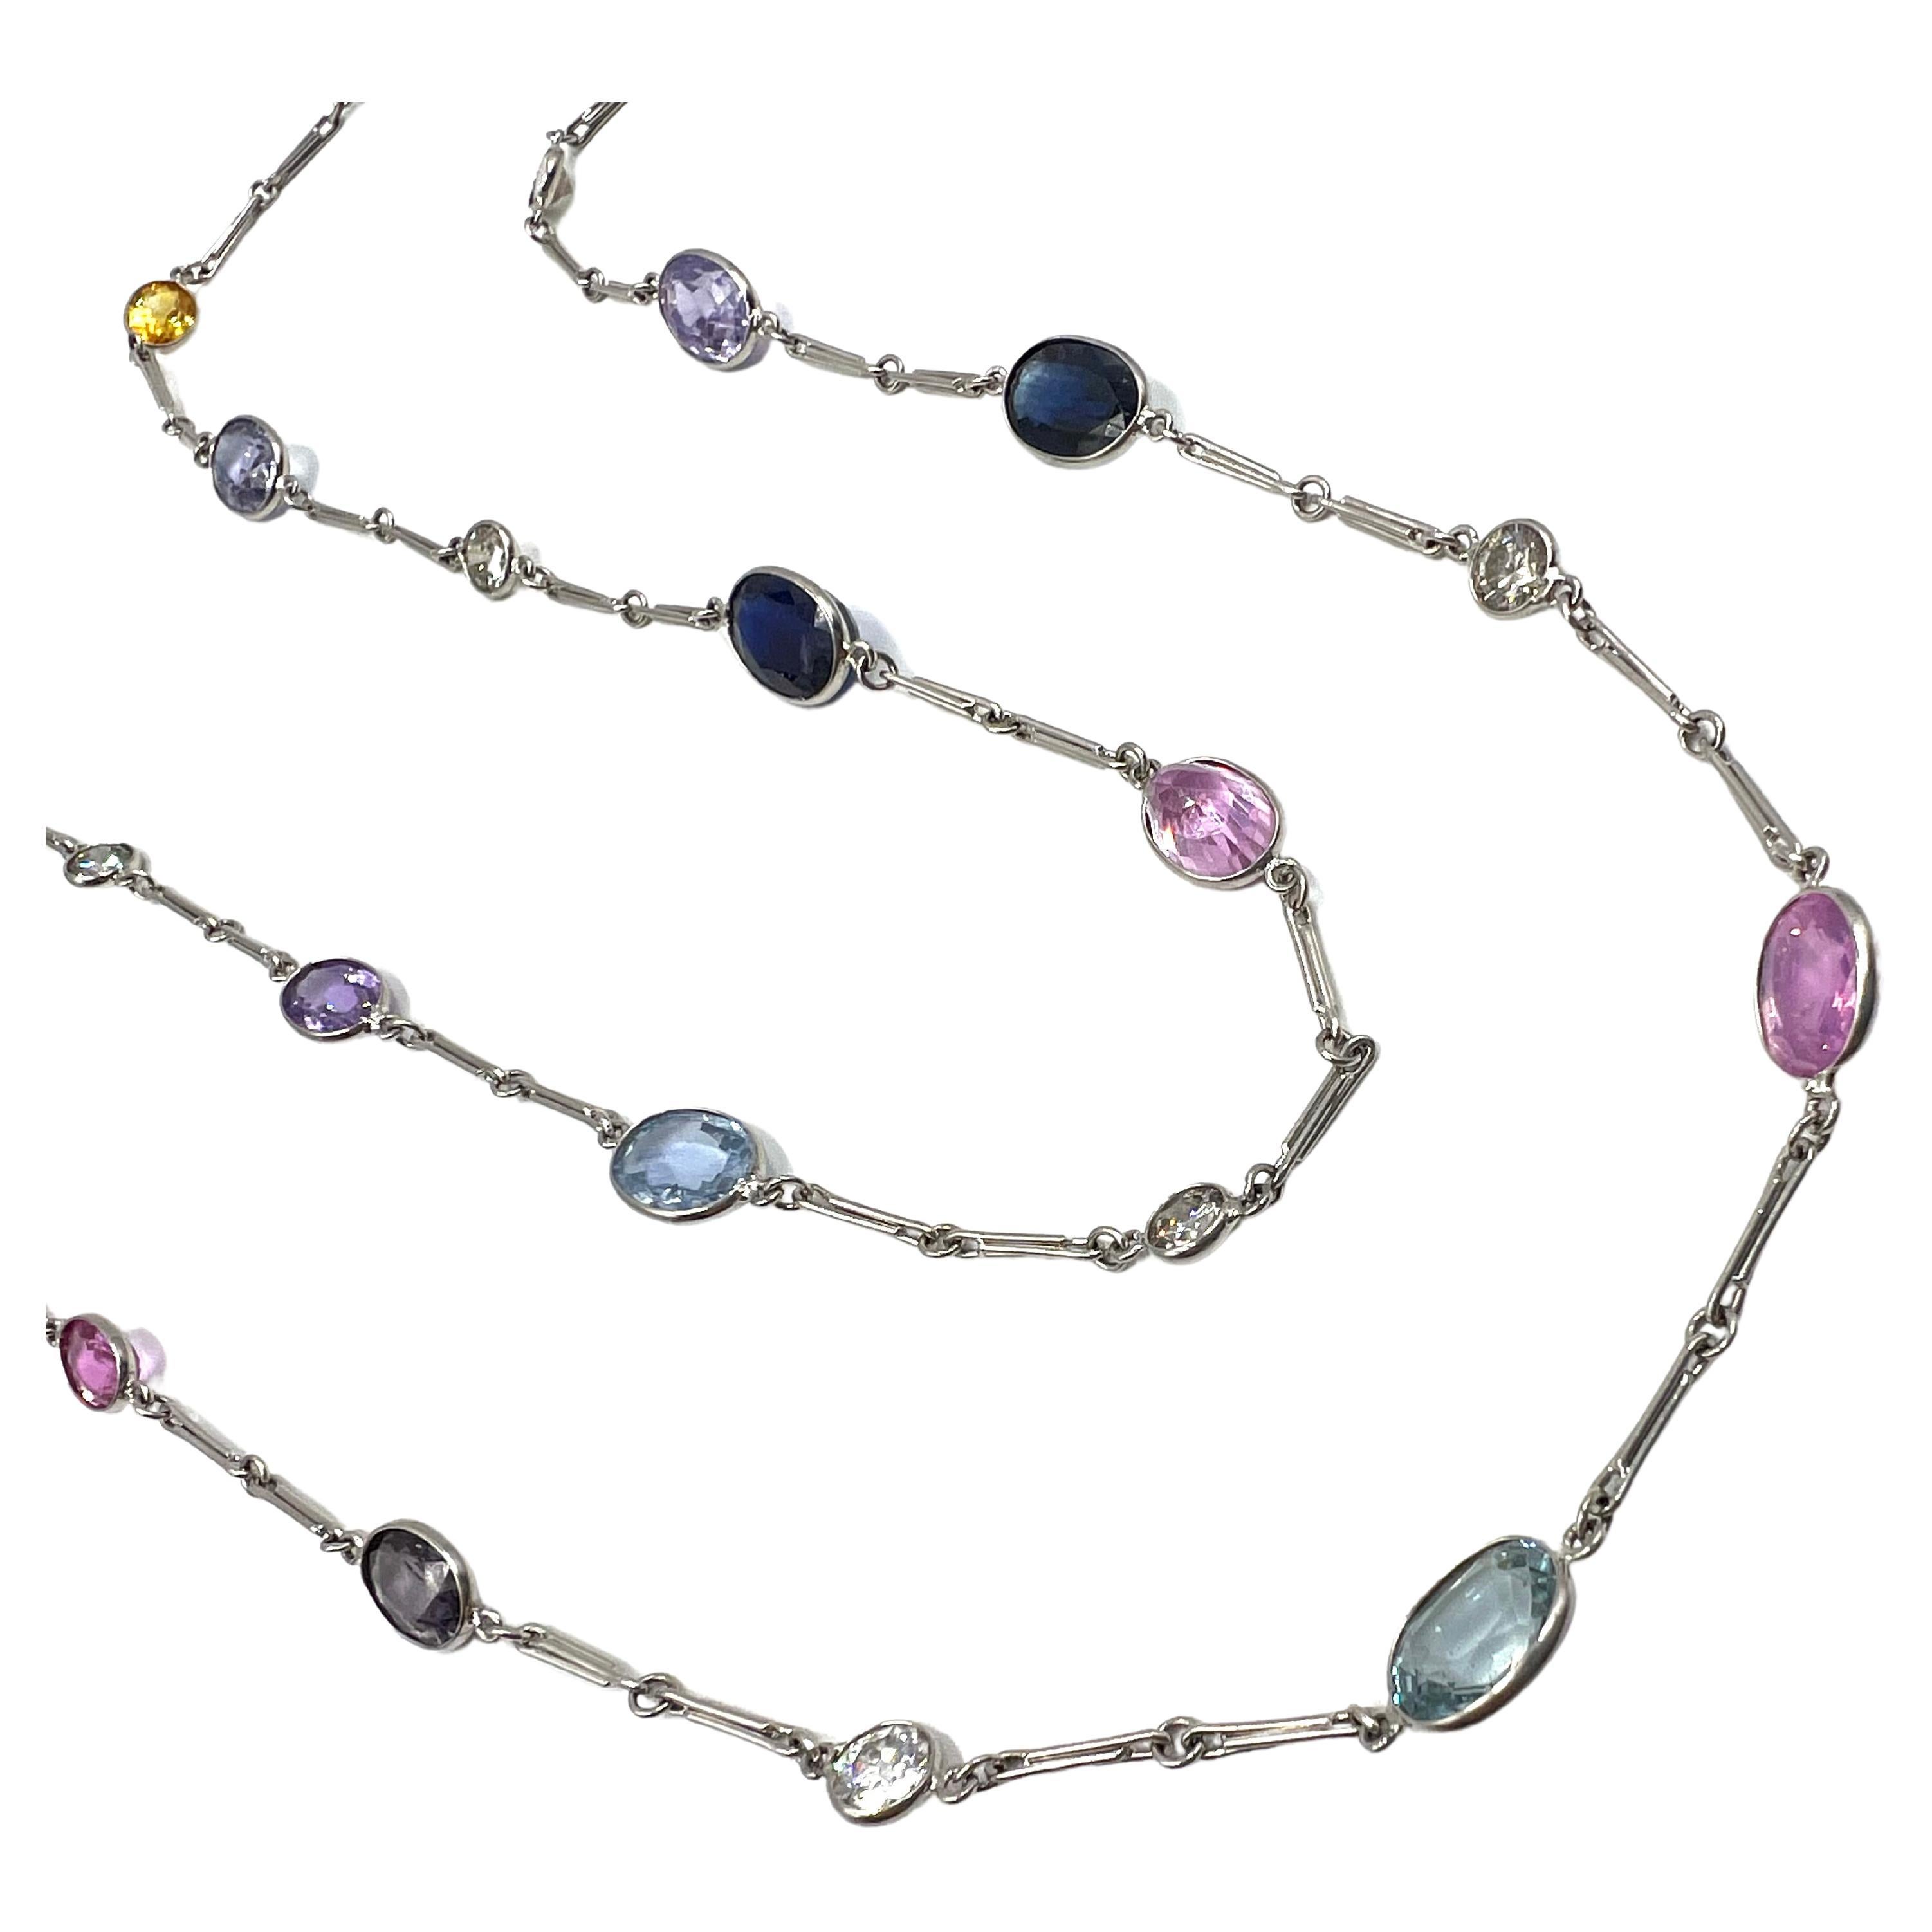 Platinum neck chain in a gemstone by the yard design, featuring alternating multicolored gemstones and diamonds. Bezel set with 24 oval mixed cut sapphires totaling approx. 41.88ct. (4 yellow, 8 blue, 6 pink and 6 violet/purple). Eleven round